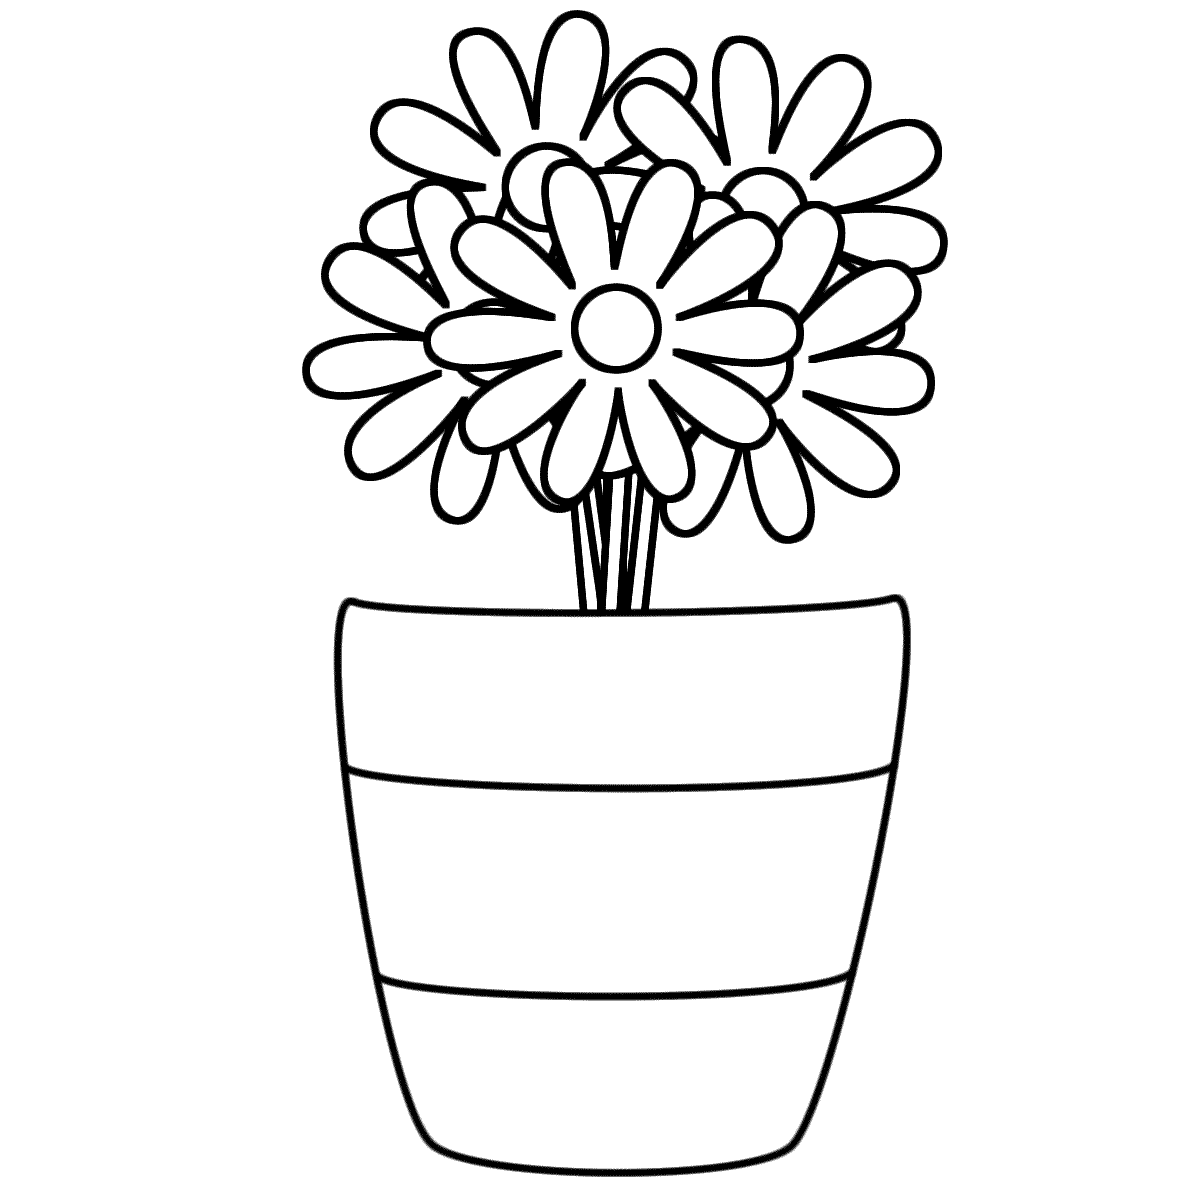 Flower Pot Coloring Pages   Best Coloring Pages For Kids